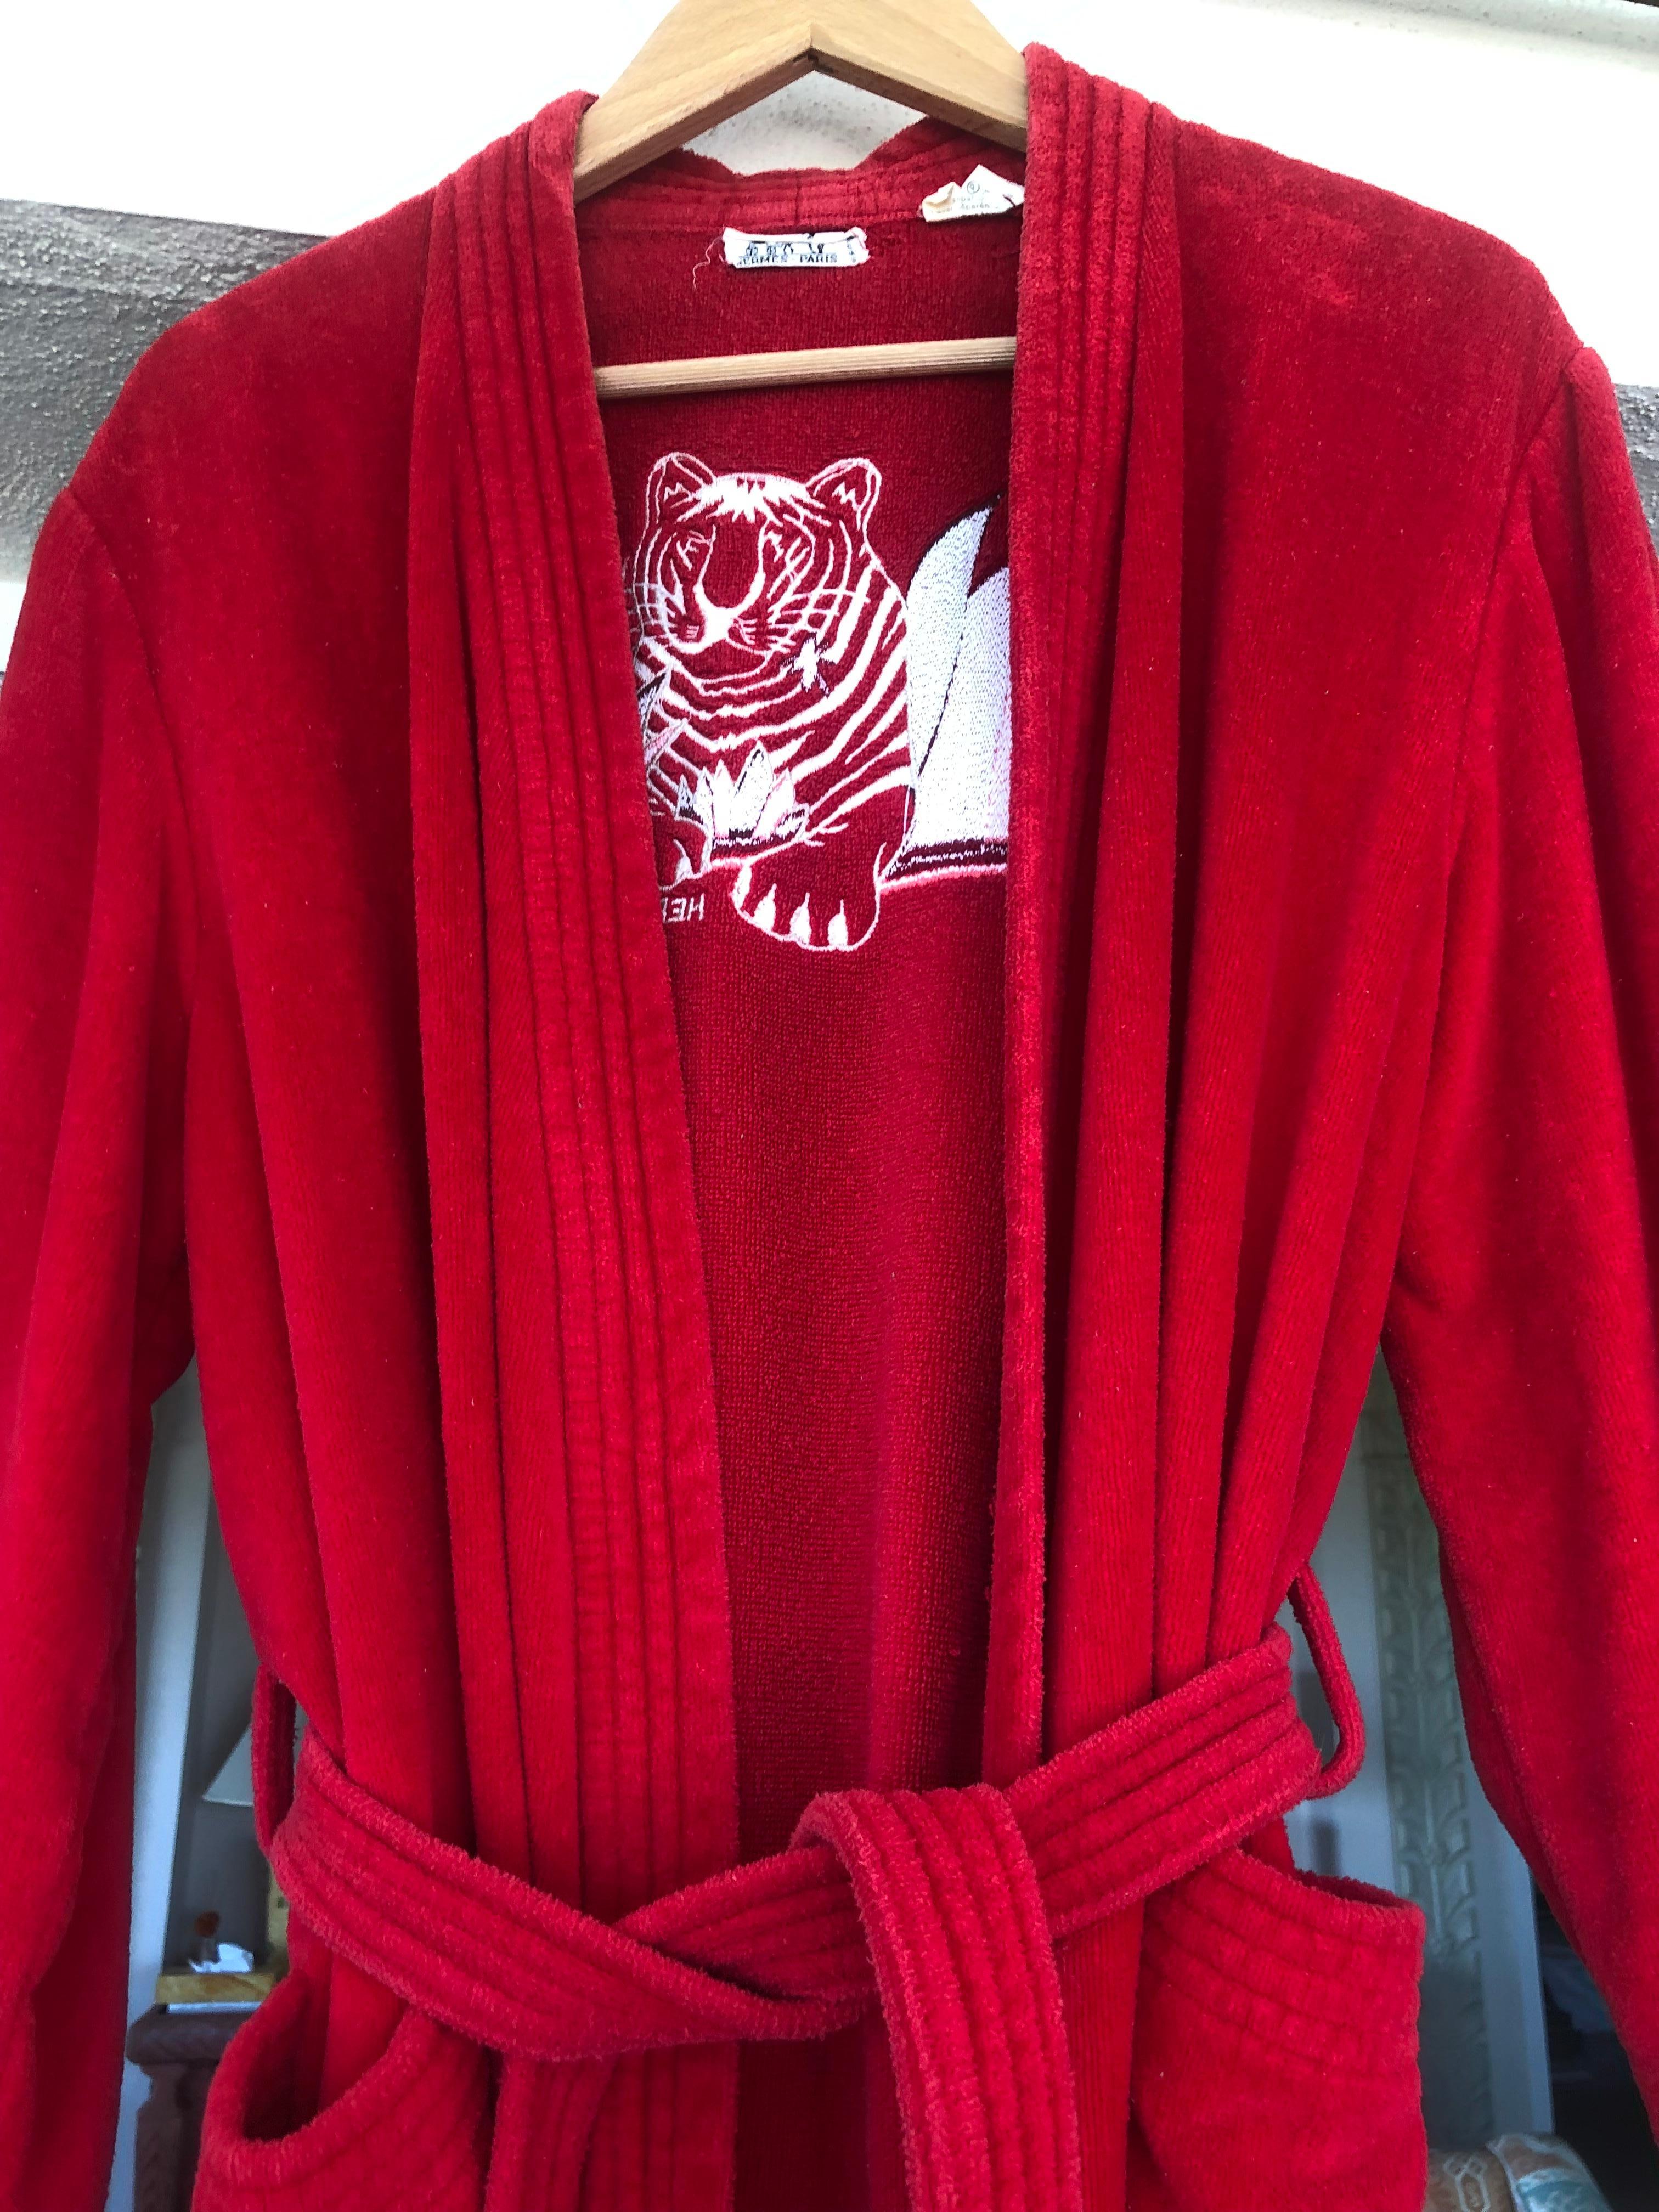 Very chic bourdeaux panthere bathrobe   two front pockets and belt.
It can be worn at the beach or at home !

Collection:
Fabric: 75% cotton - 25% silk
Color: Bordeaux 
Size: FR 40 (large fit)